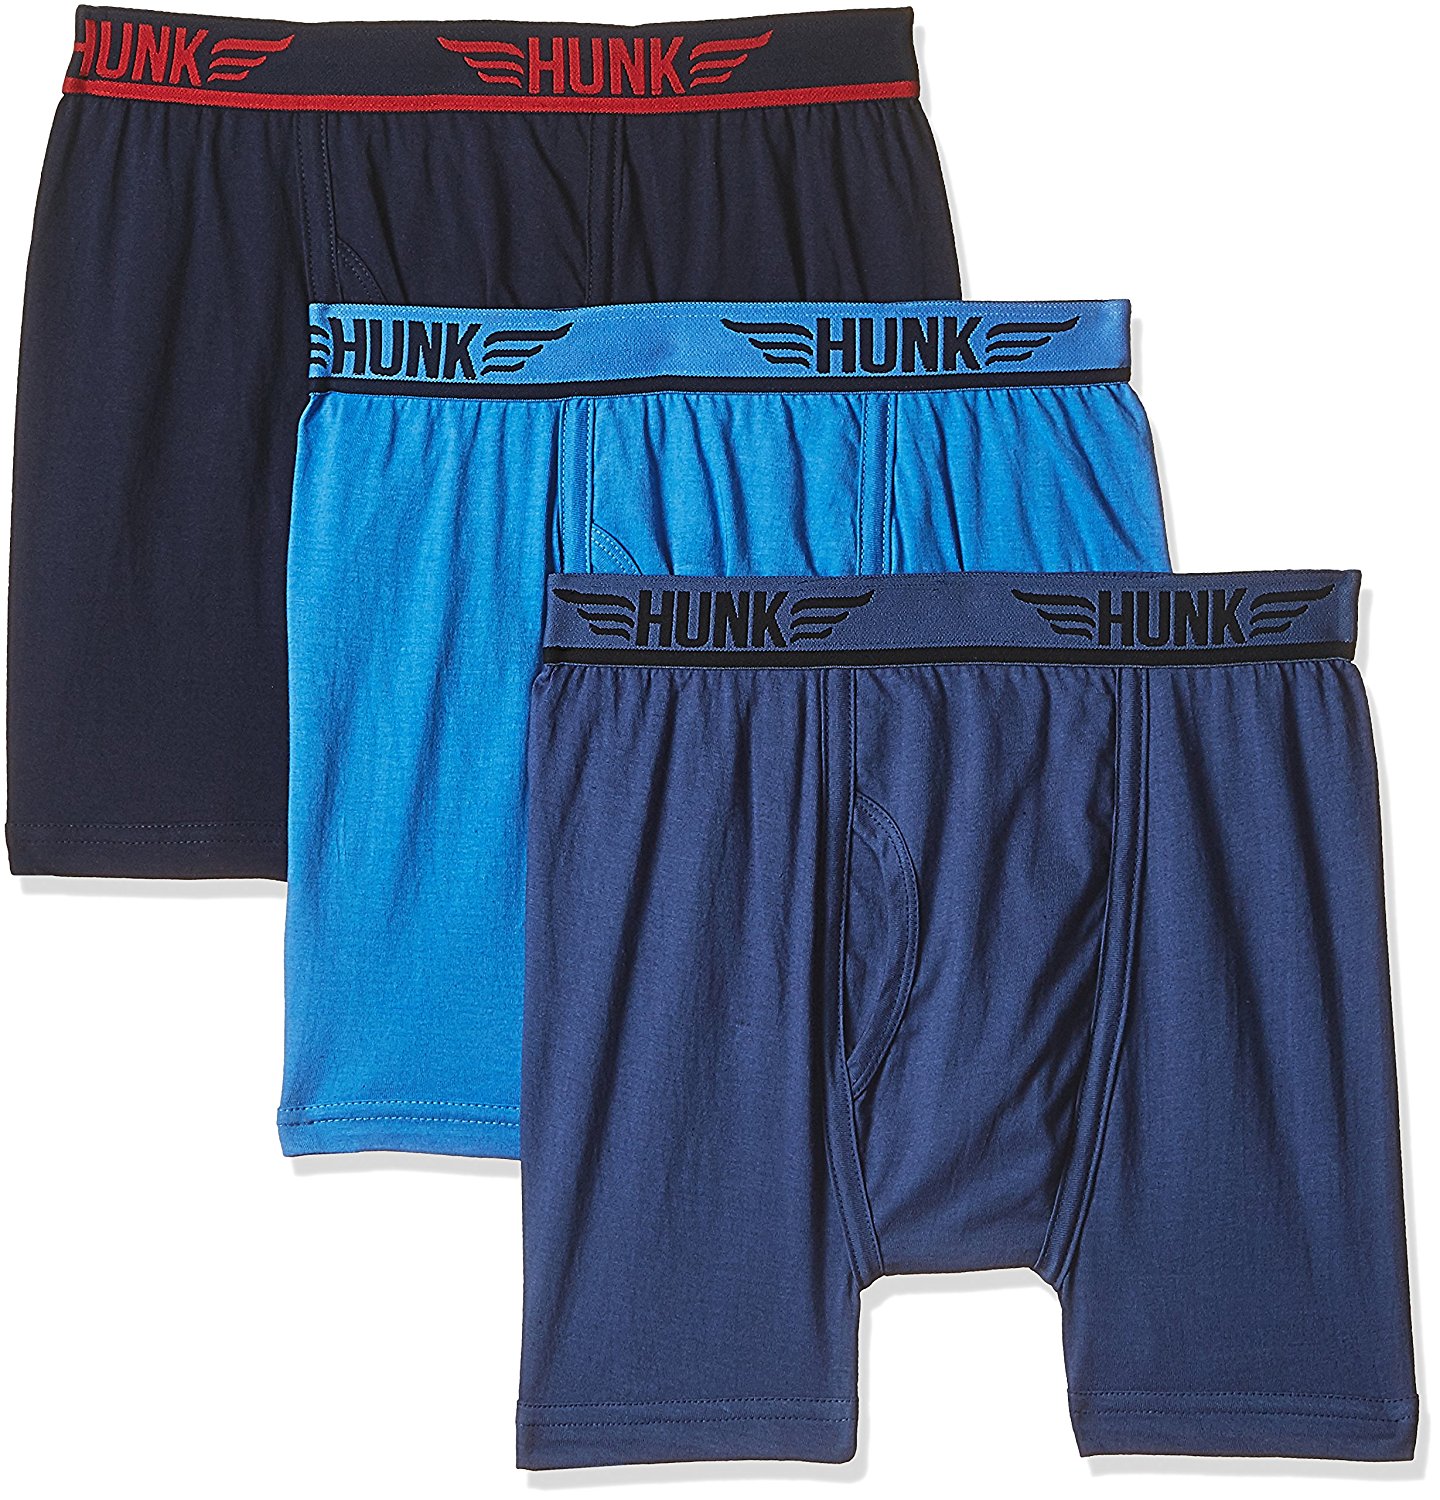 Amazon: Buy RUPA Frontline Men’s Cotton Trunks (Pack of 3) (Colors May Vary) at Rs 174 only